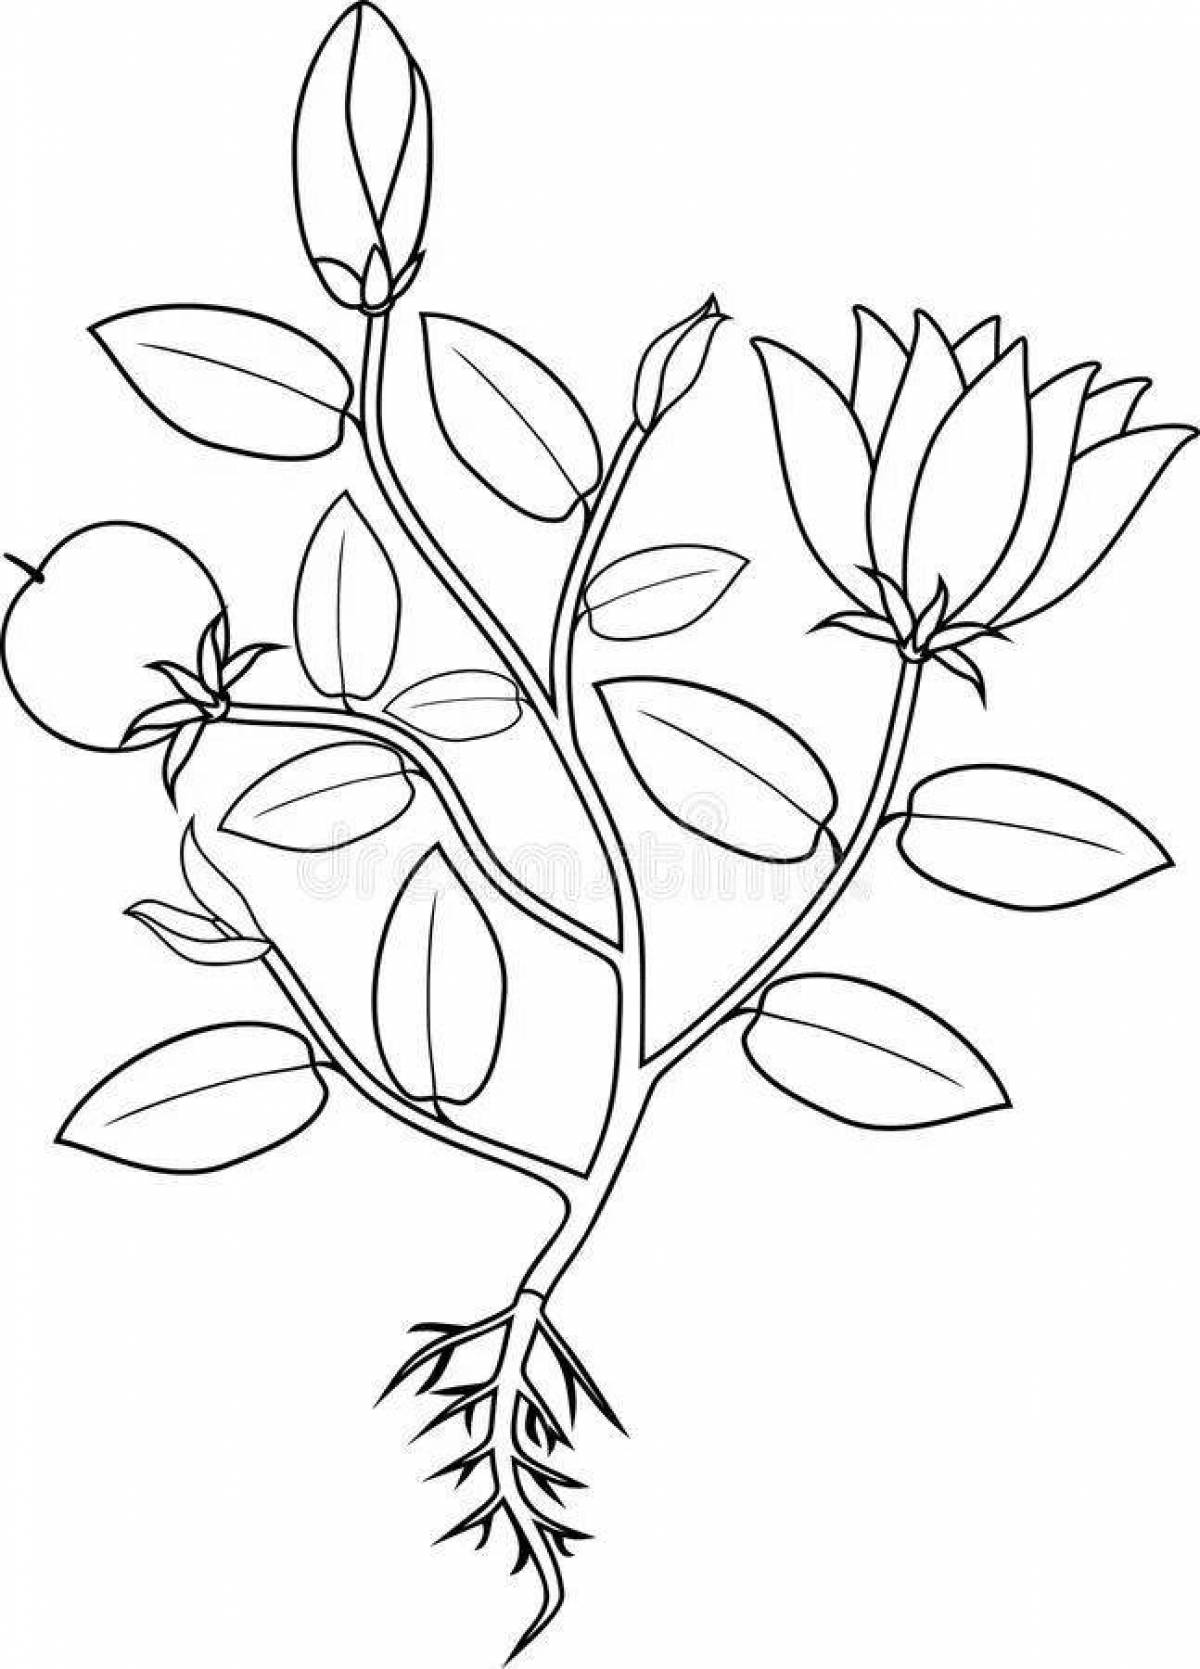 Coloring page of arcane plant parts